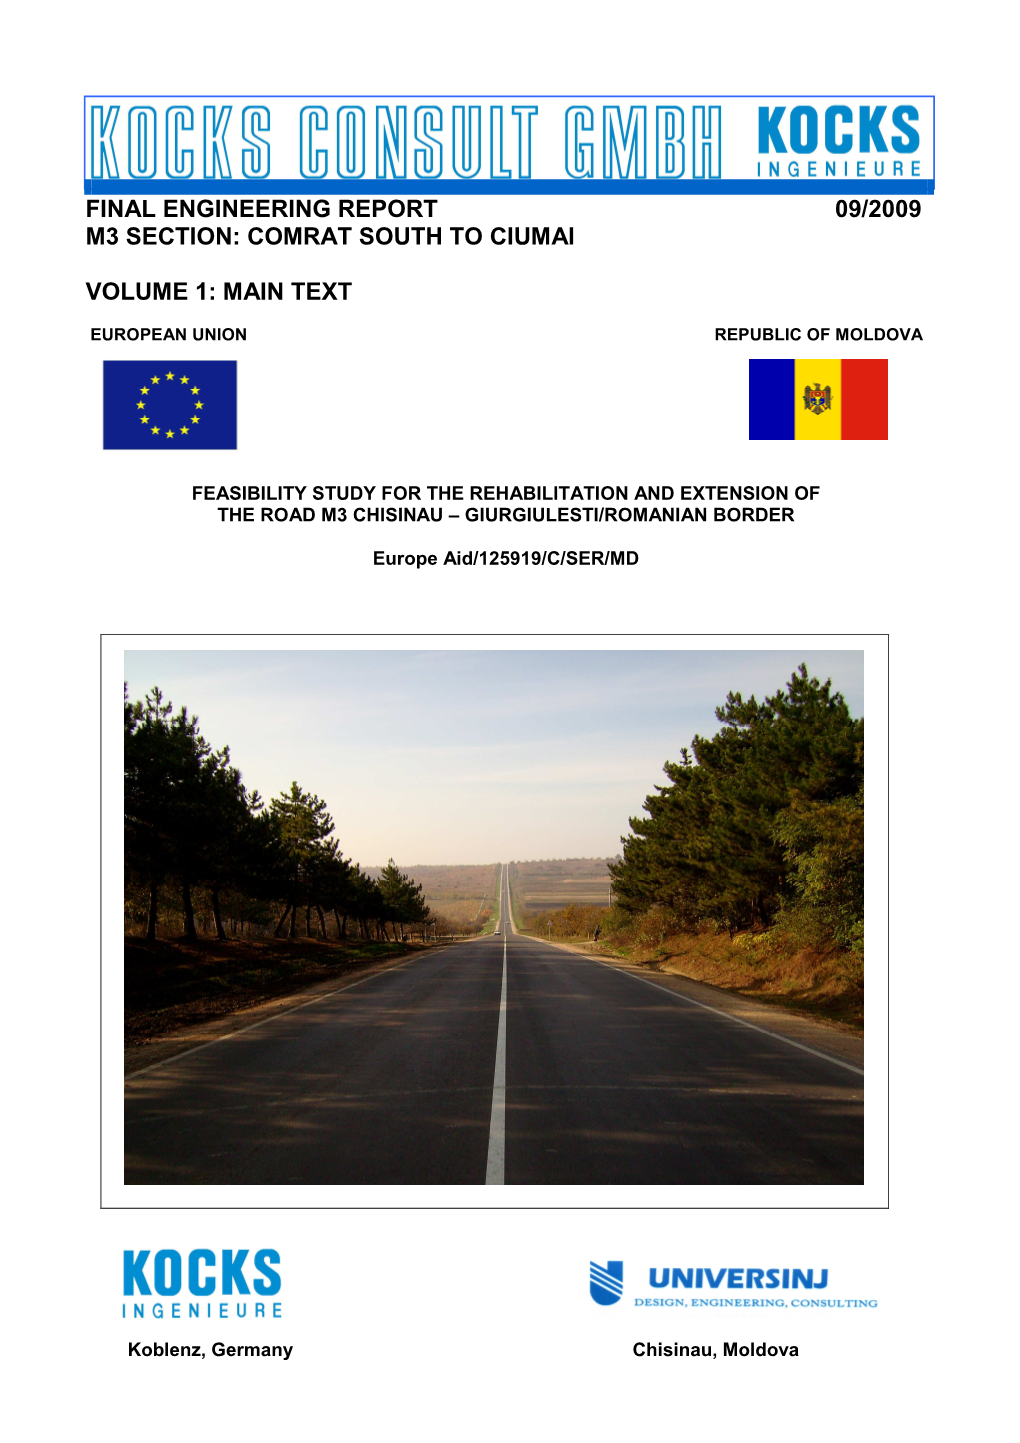 Final Engineering Report 09/2009 M3 Section: Comrat South to Ciumai